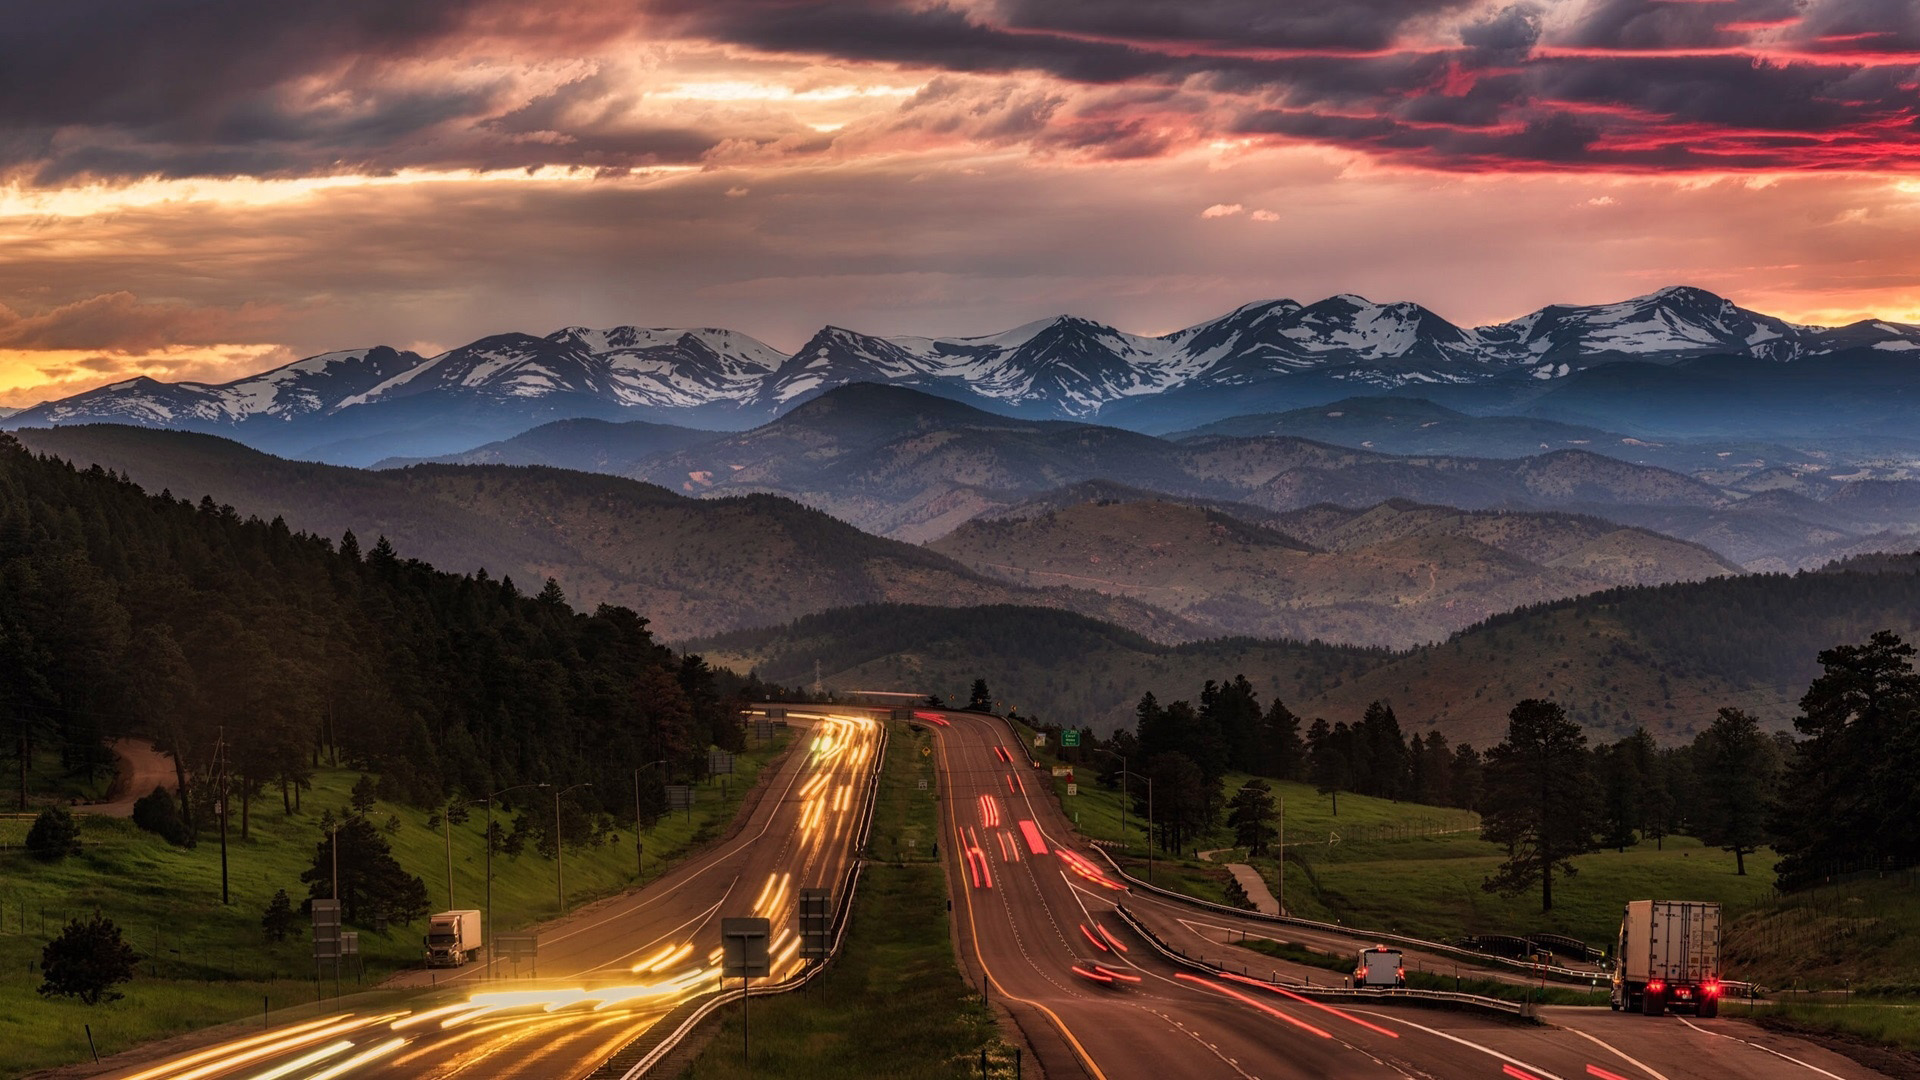 General 1920x1080 nature landscape trees mountains highway evening sunset snowy peak car long exposure light trails forest Rocky Mountains USA Colorado Michael Ryno I-70